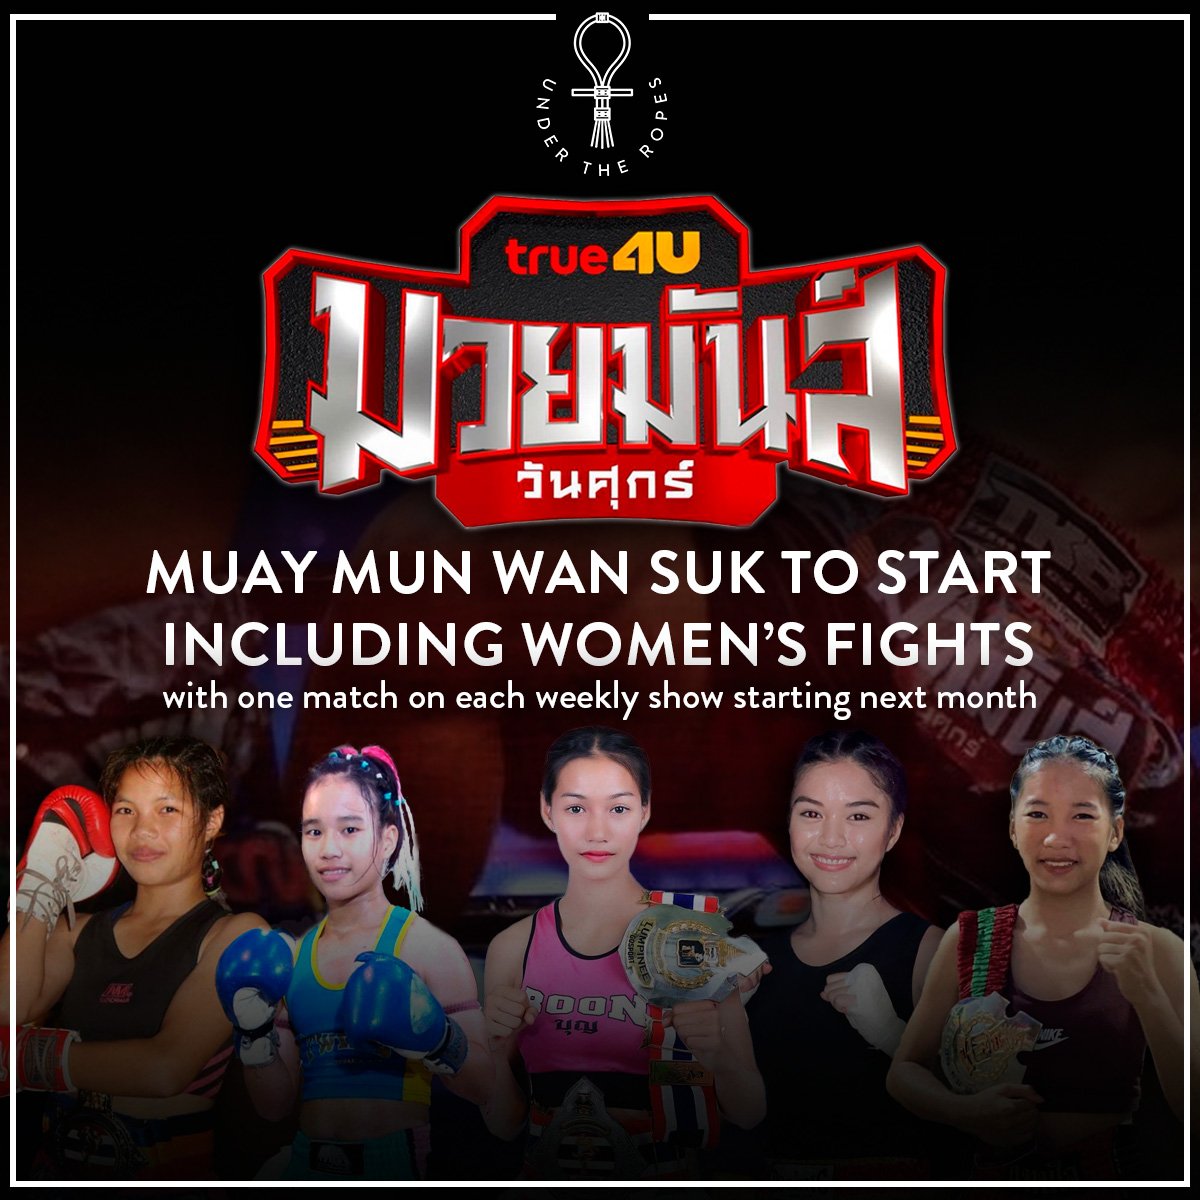 Petchyindee's Muay Mun Wan Suk promotion will now add women's bouts to their weekly shows at Rangsit Stadium, starting from February 23rd with one bout per week. Match-up info: m.facebook.com/story.php?stor…